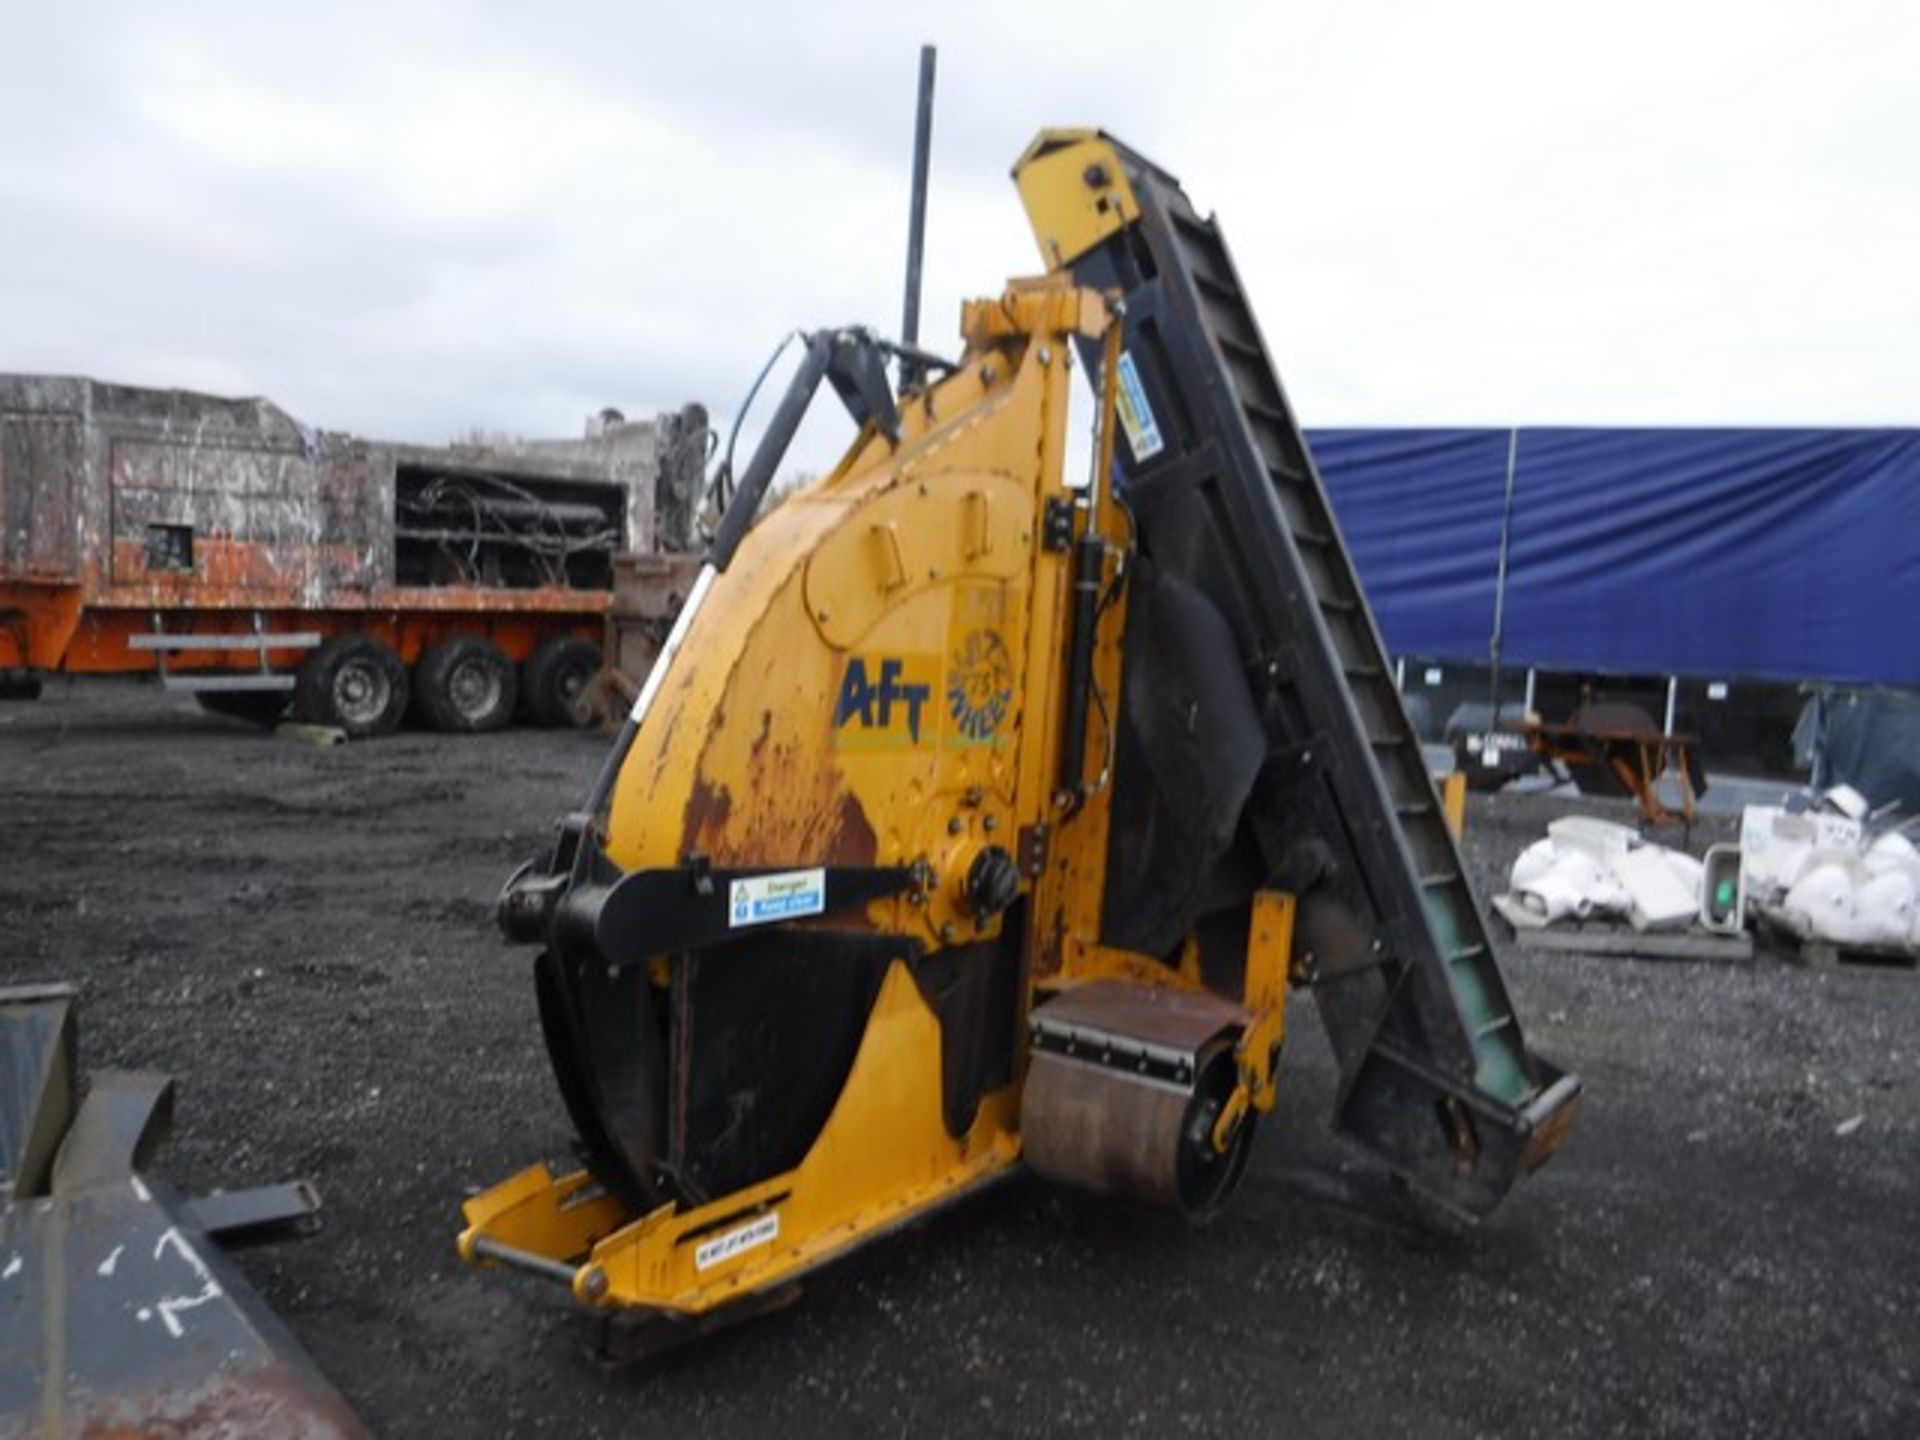 A.F.T. WIZZ WHEEL AFT75 trencher c/w side driving conveyor, pipe reel and gravel box S/N AO68 2013 - Image 4 of 5